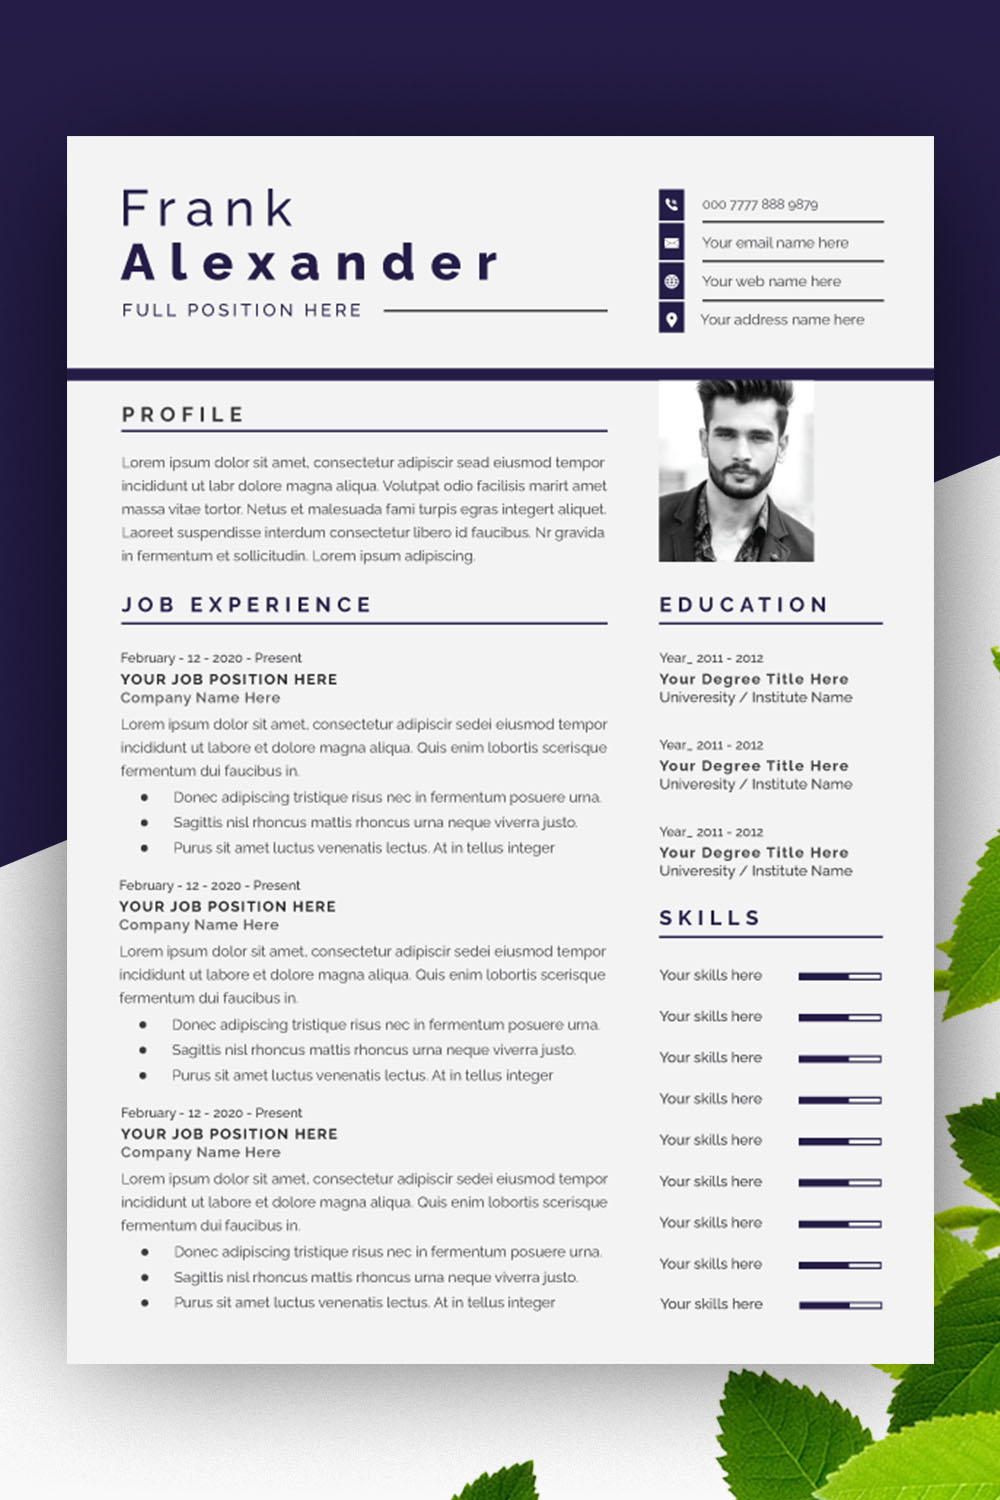 Clean Resume Layout Resume Design Template pinterest preview image.